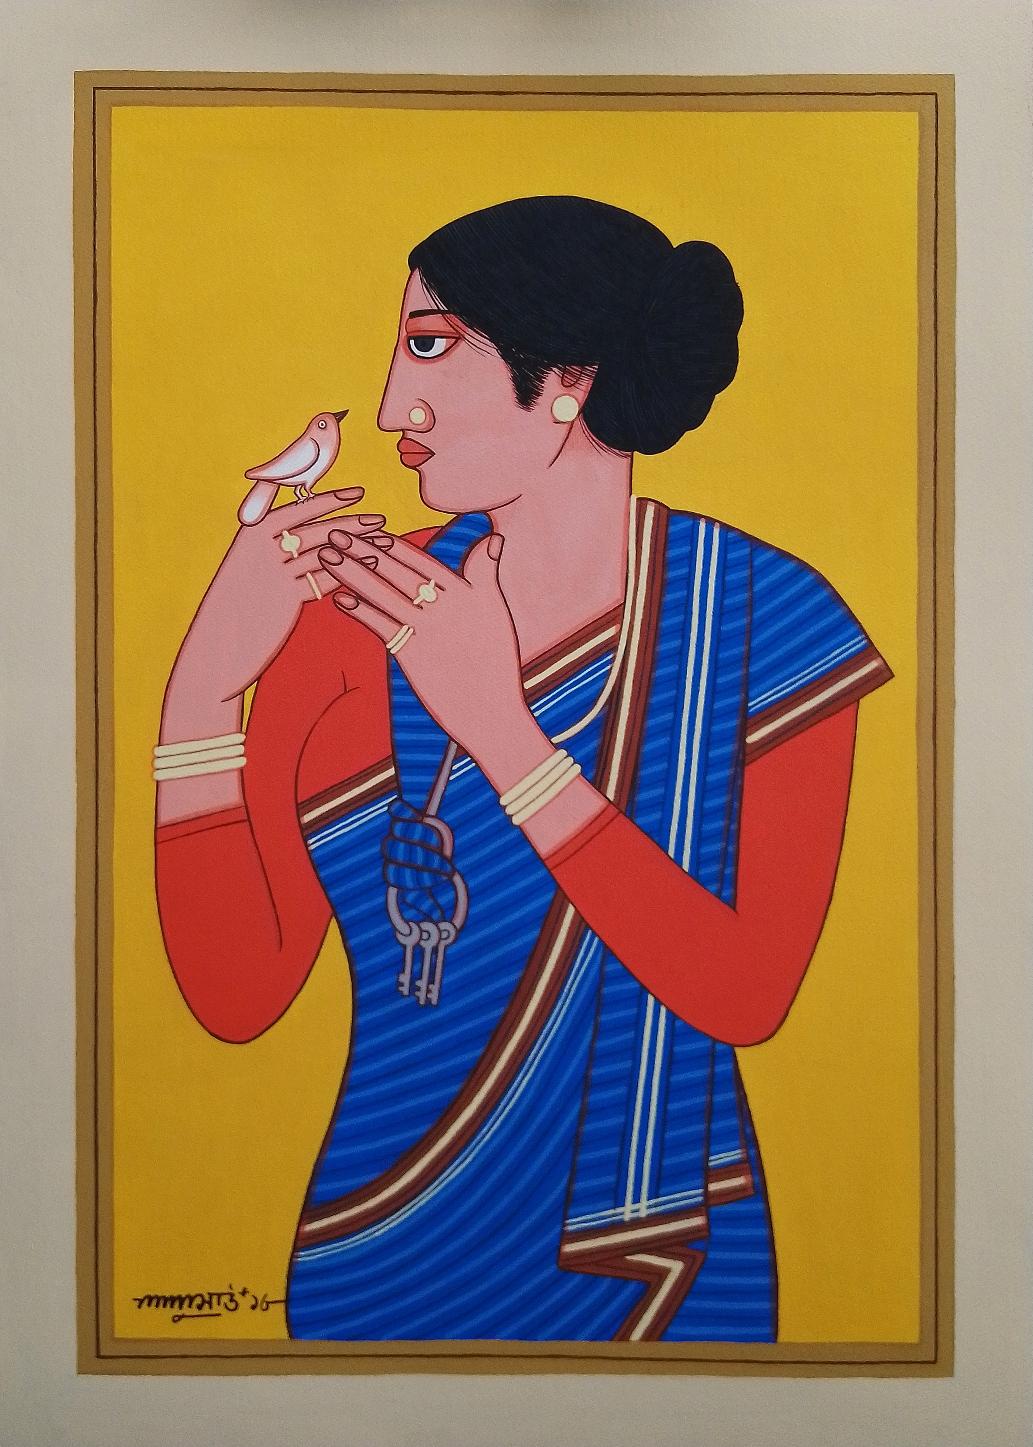 Lalu Prasad Shaw - Bibi - 20 x 28 inches
Tempera on Board, 2018
(Unframed & Delivered)

Style : Known widely for his highly stylized portraits of Bengali women and couples, Lalu Prasad Shaw’s works lay the most emphasis on his subject’s physical